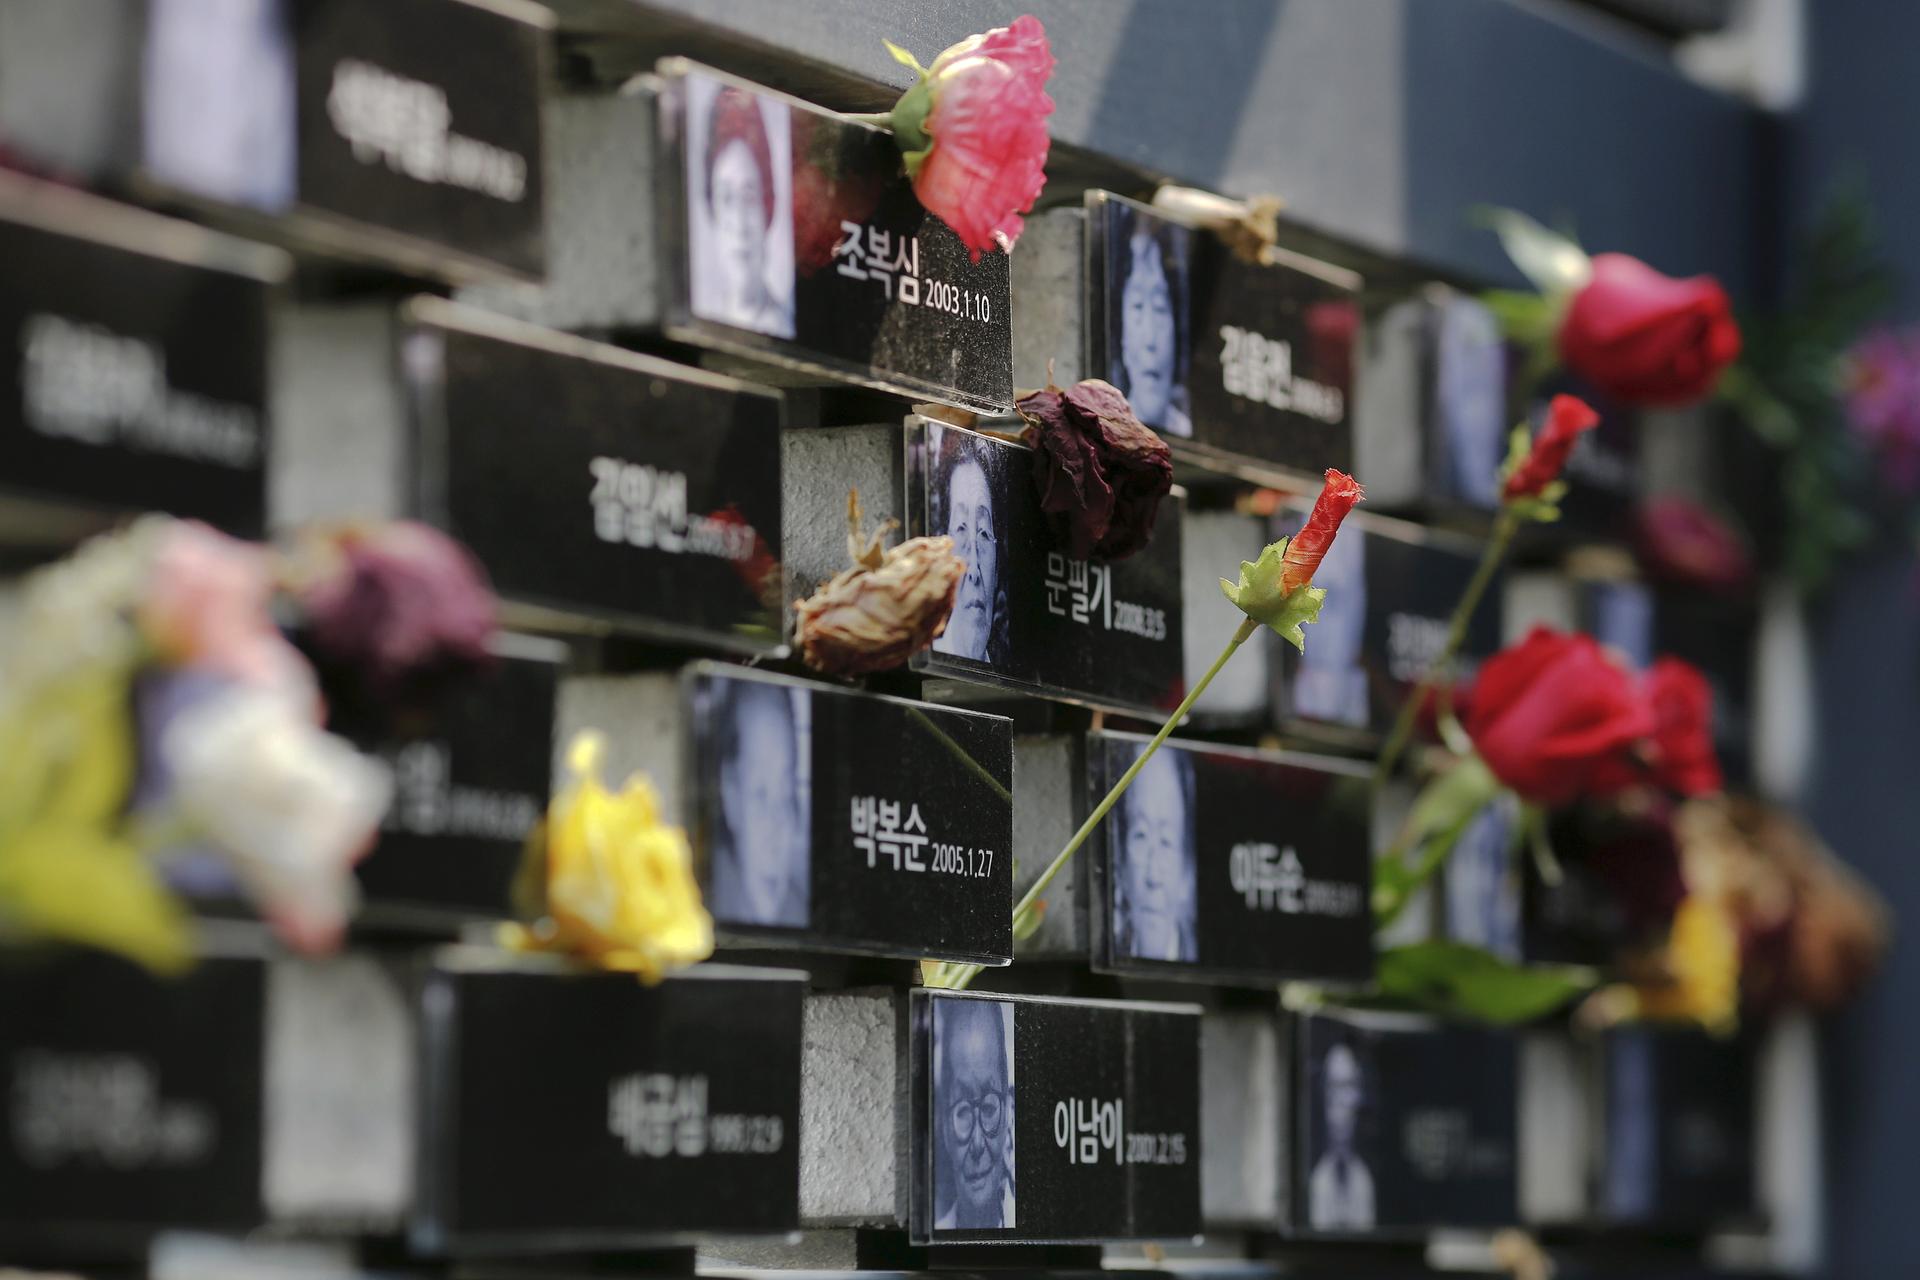 Flowers are placed on a memorial wall commemorating the late former South and North Korean "comfort women" at the War and Women's Human Rights Museum" in Seoul, South Korea, July 22, 2015. â€œComfort womenâ€? is the Japanese euphemism for women who were f